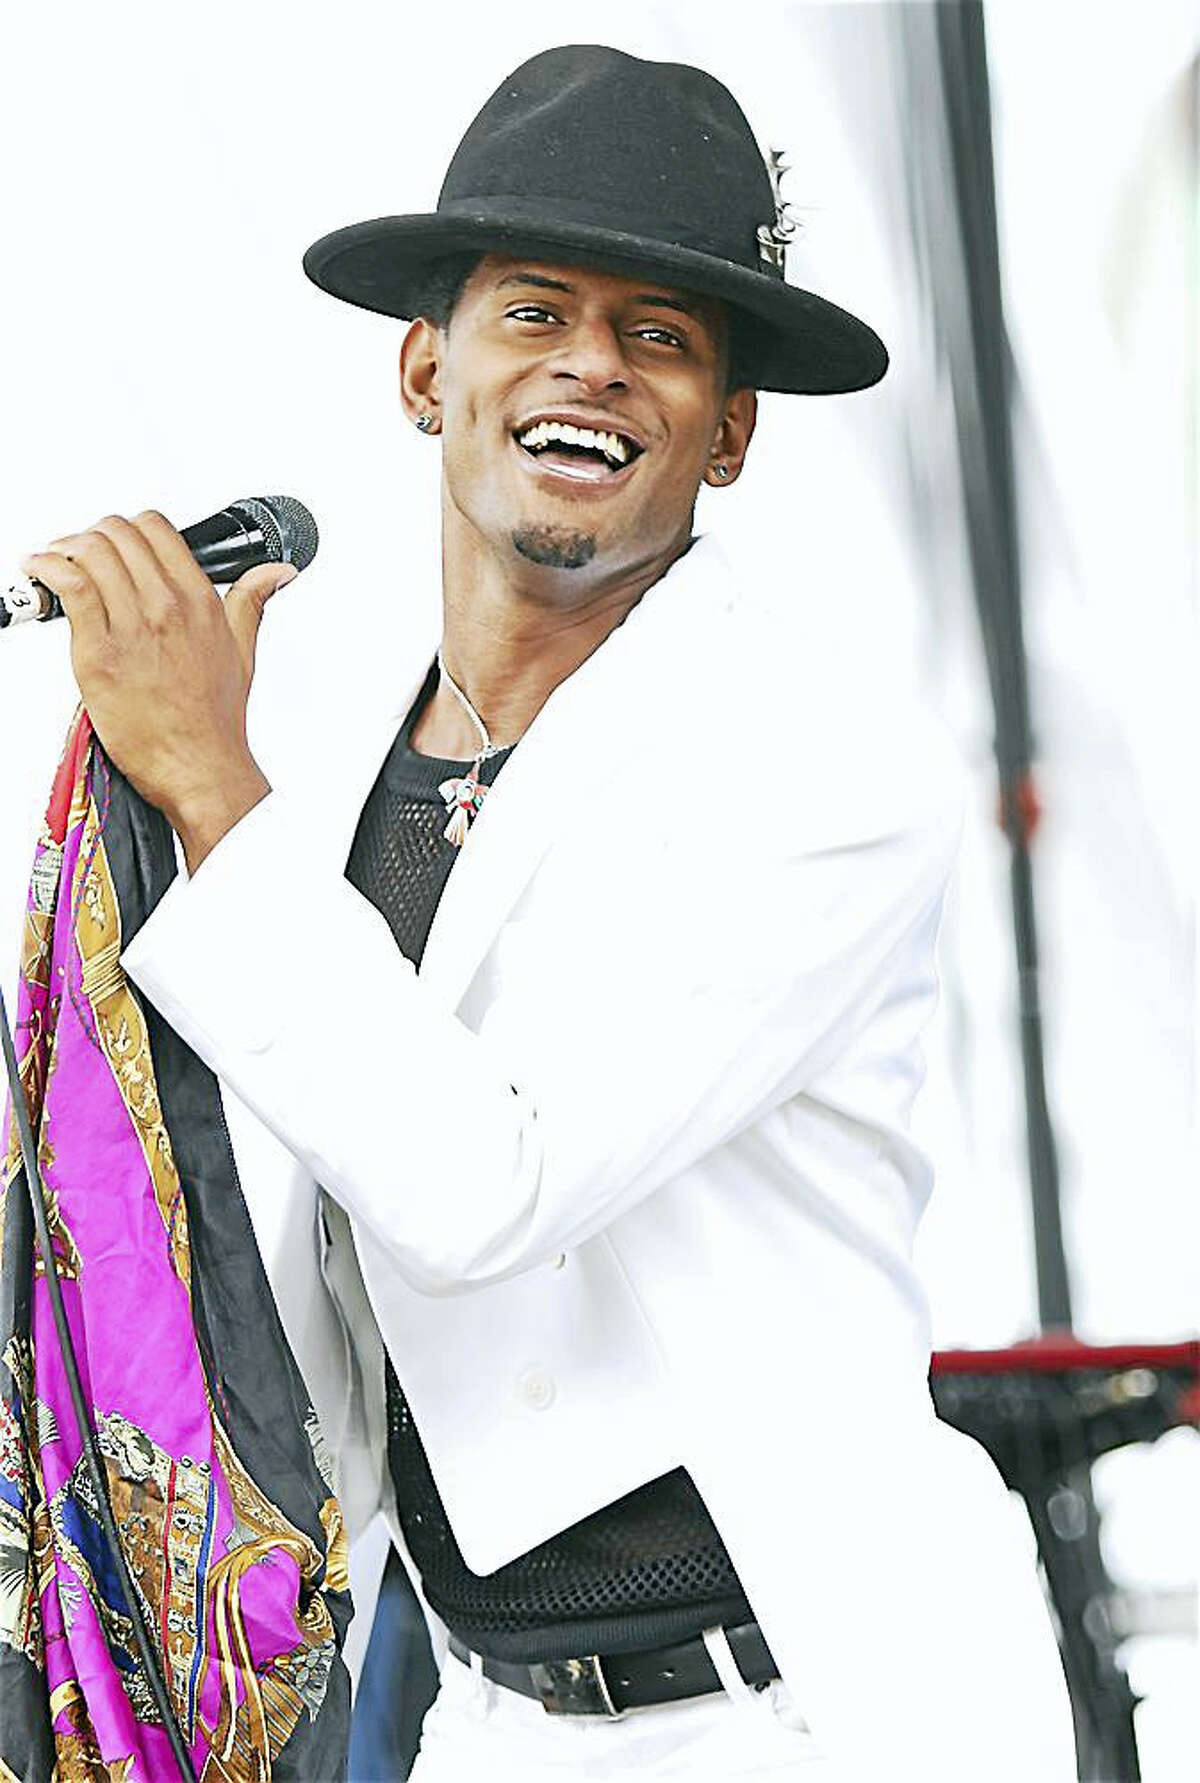 Photo by John AtashianSinger Ziek McCarter is shown performing on stage with Con Brio during the bands high energy concert appearance at the 11th Annual Mountain Jam Festival. The four day music festival is held on Hunter Mountain in Hunter, New York during the first weekend in June. You can learn more about annual Mountain Jam Festival at www.mountainjam.com